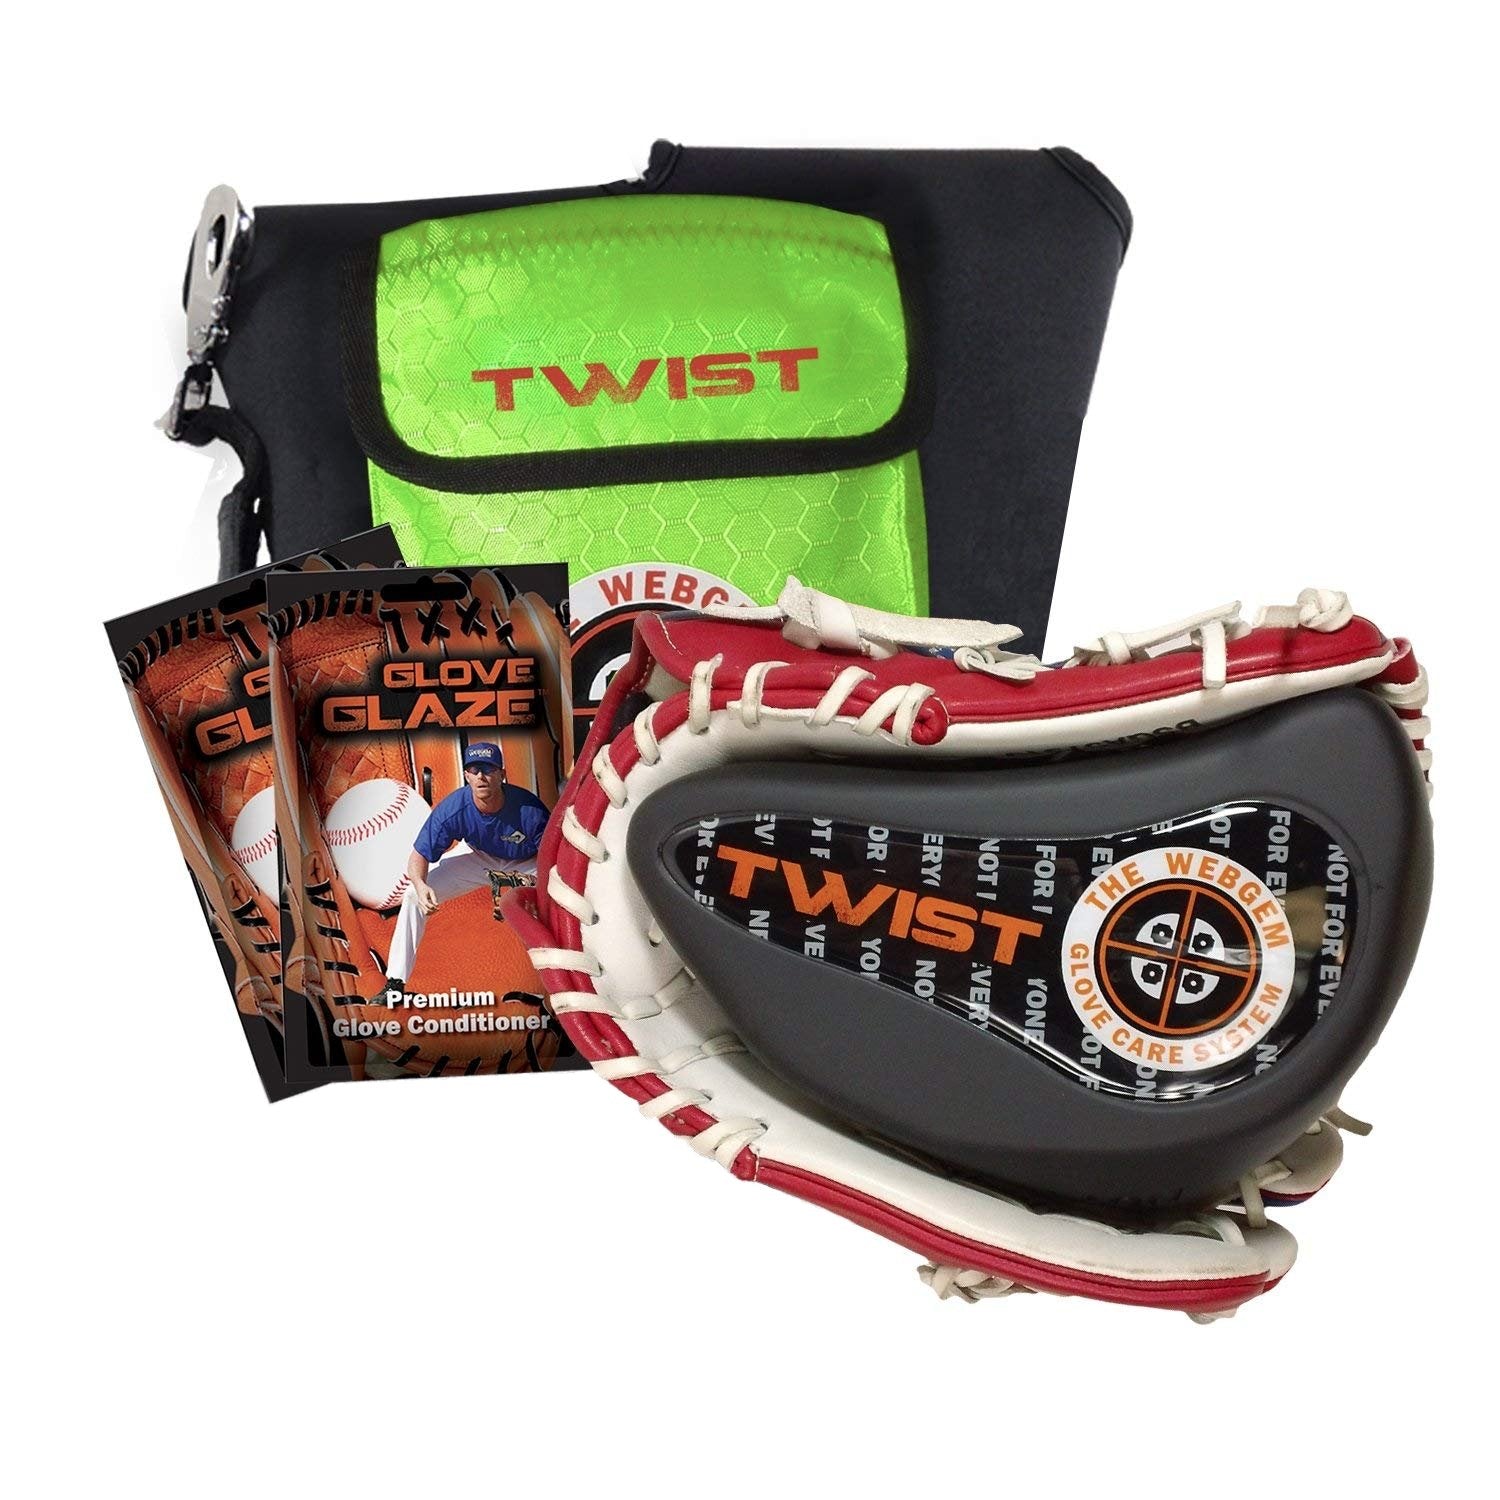 The Twist- Best Infield Gloves & Care System